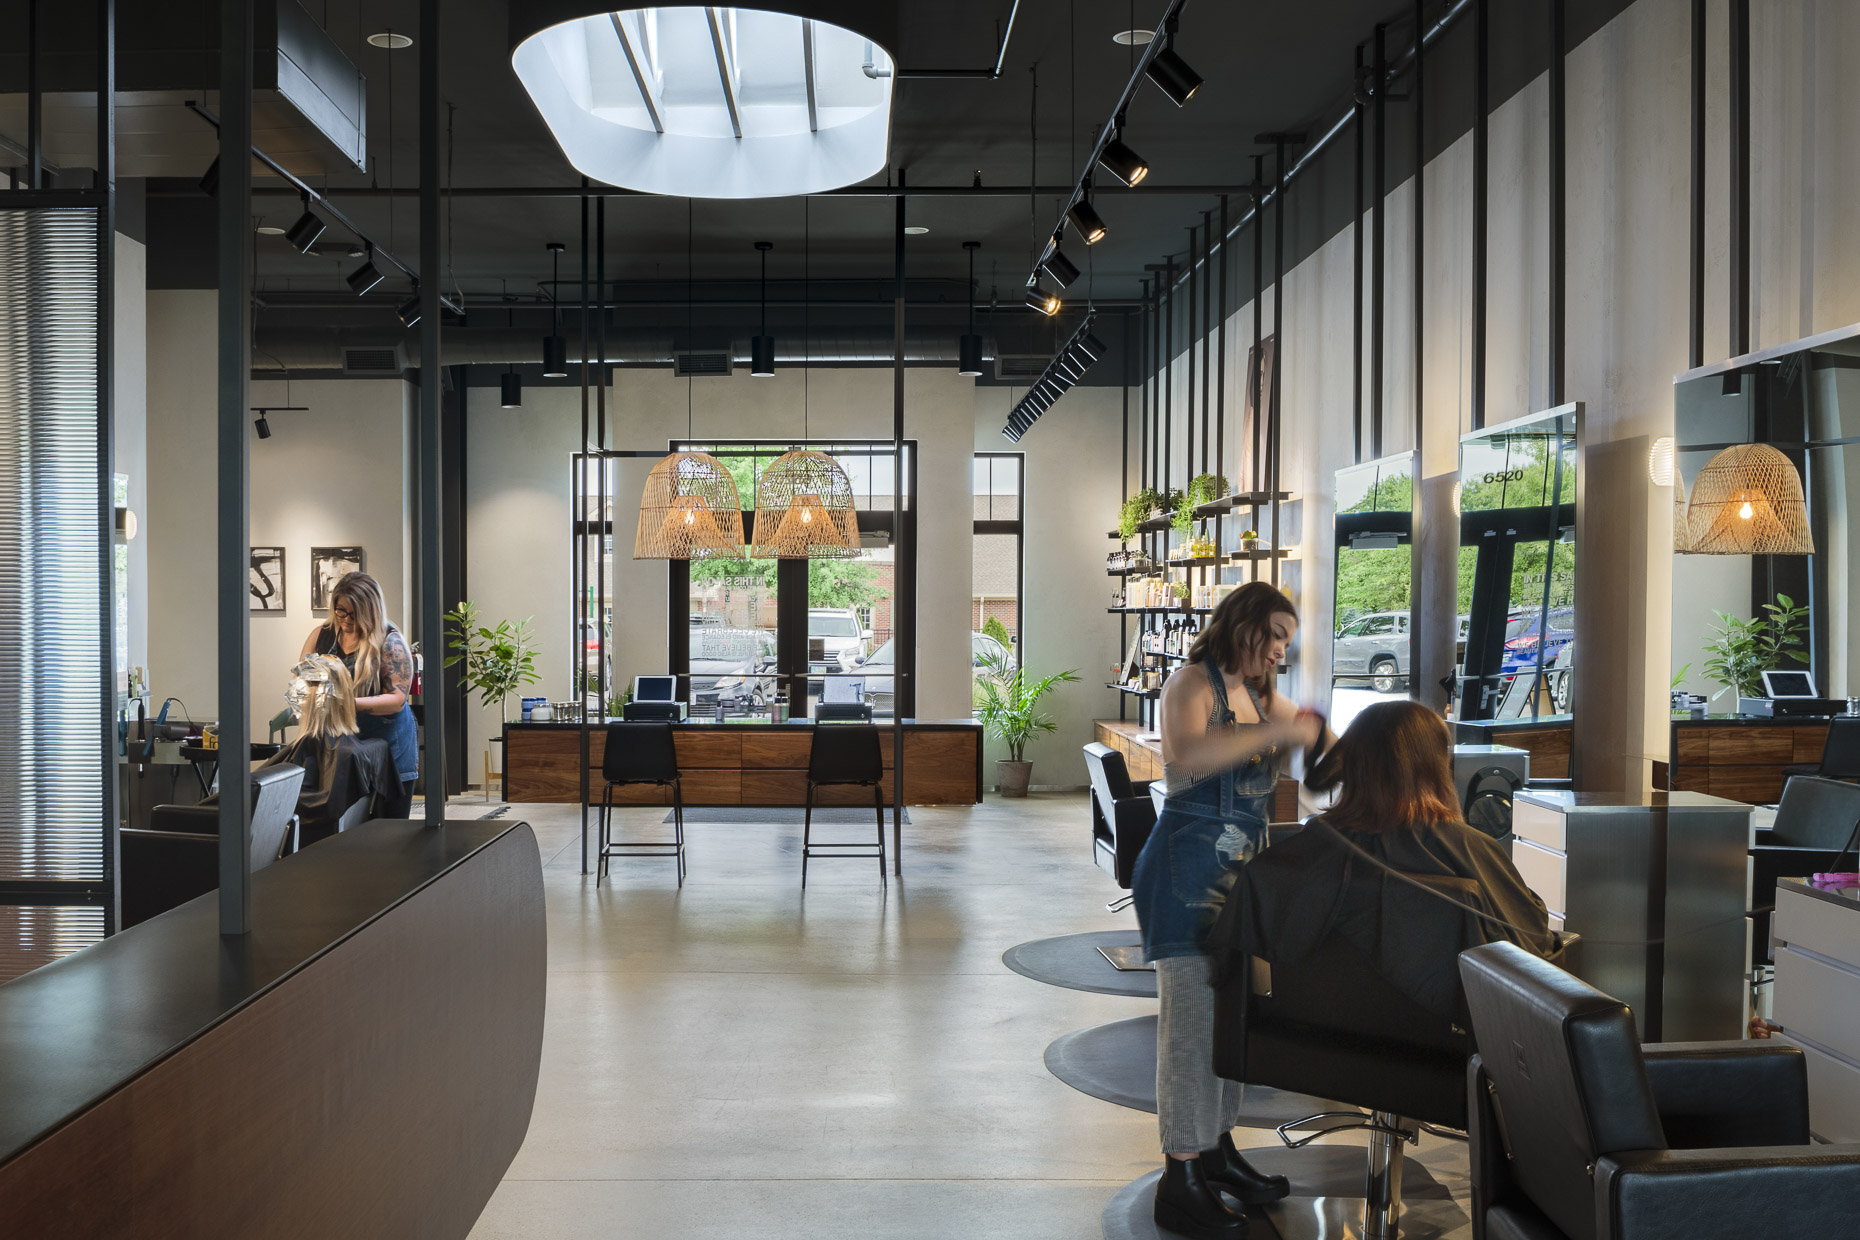 Mission Salon by TimLai Architects photographed by Lauren K Davis based in Columbus, Ohio